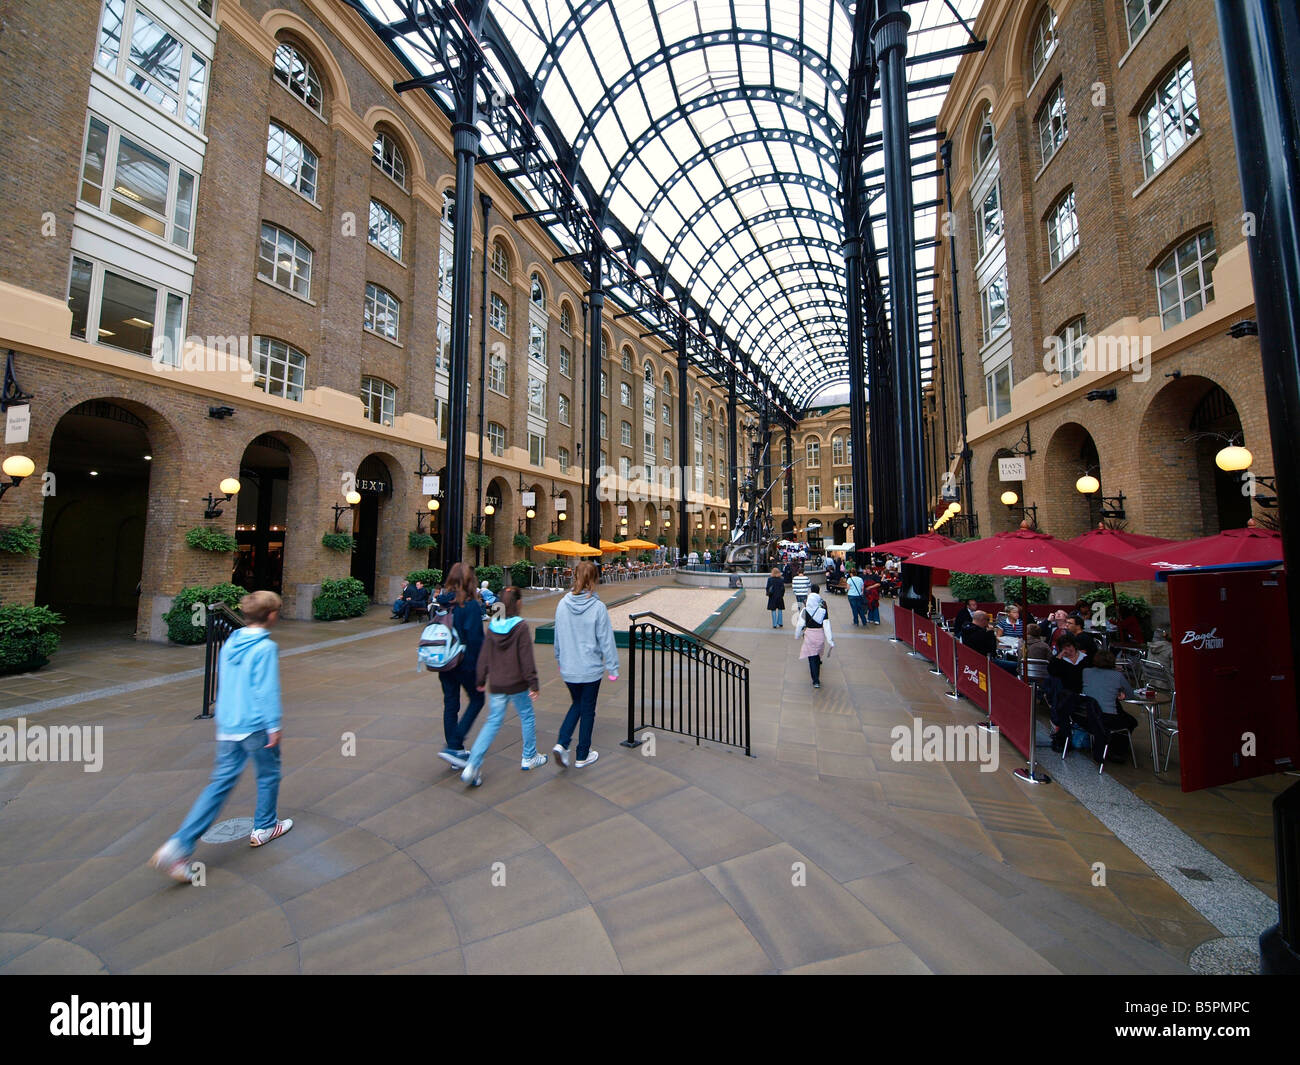 Hays galleria shopping mall central London UK is a restored tea clipper wharf built in an enclosed dock Stock Photo